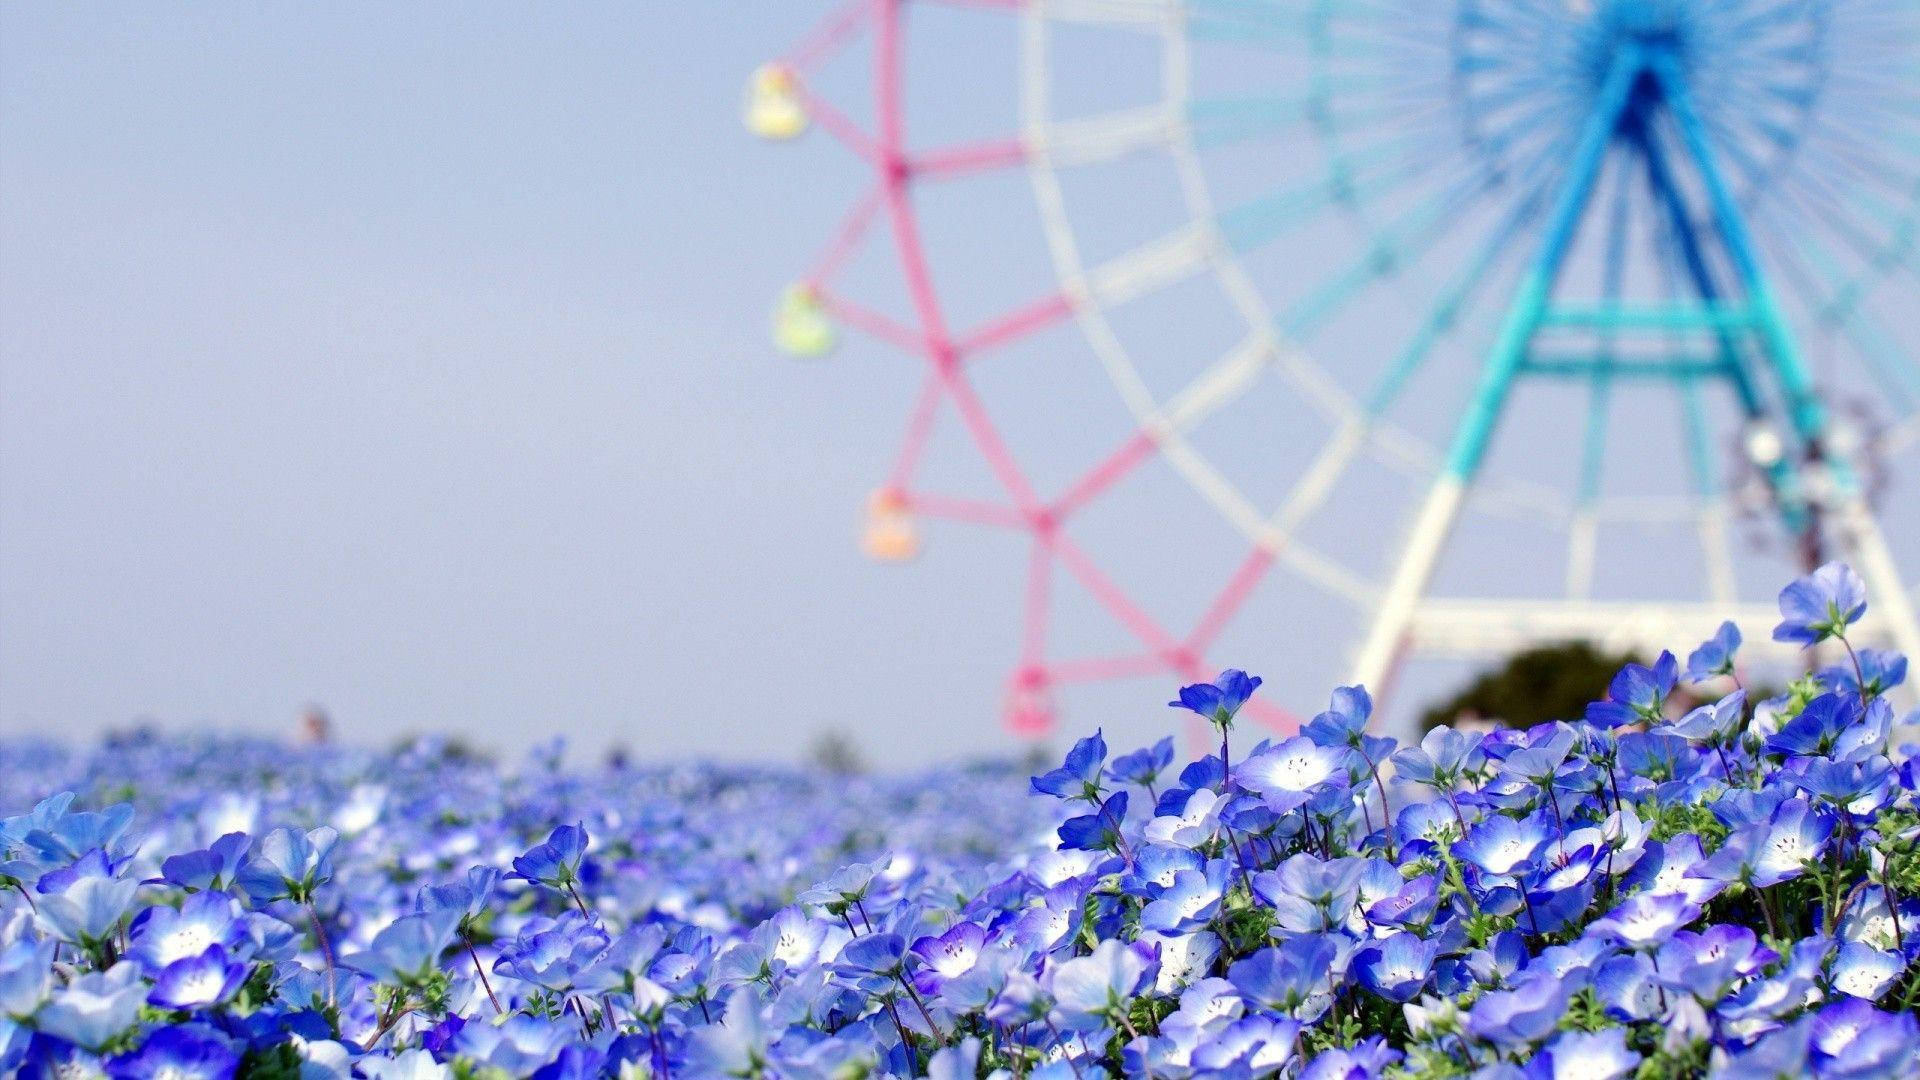 Captivating Scenery of a Blurry Ferris Wheel Amidst Blooming Blue Flowers Wallpaper